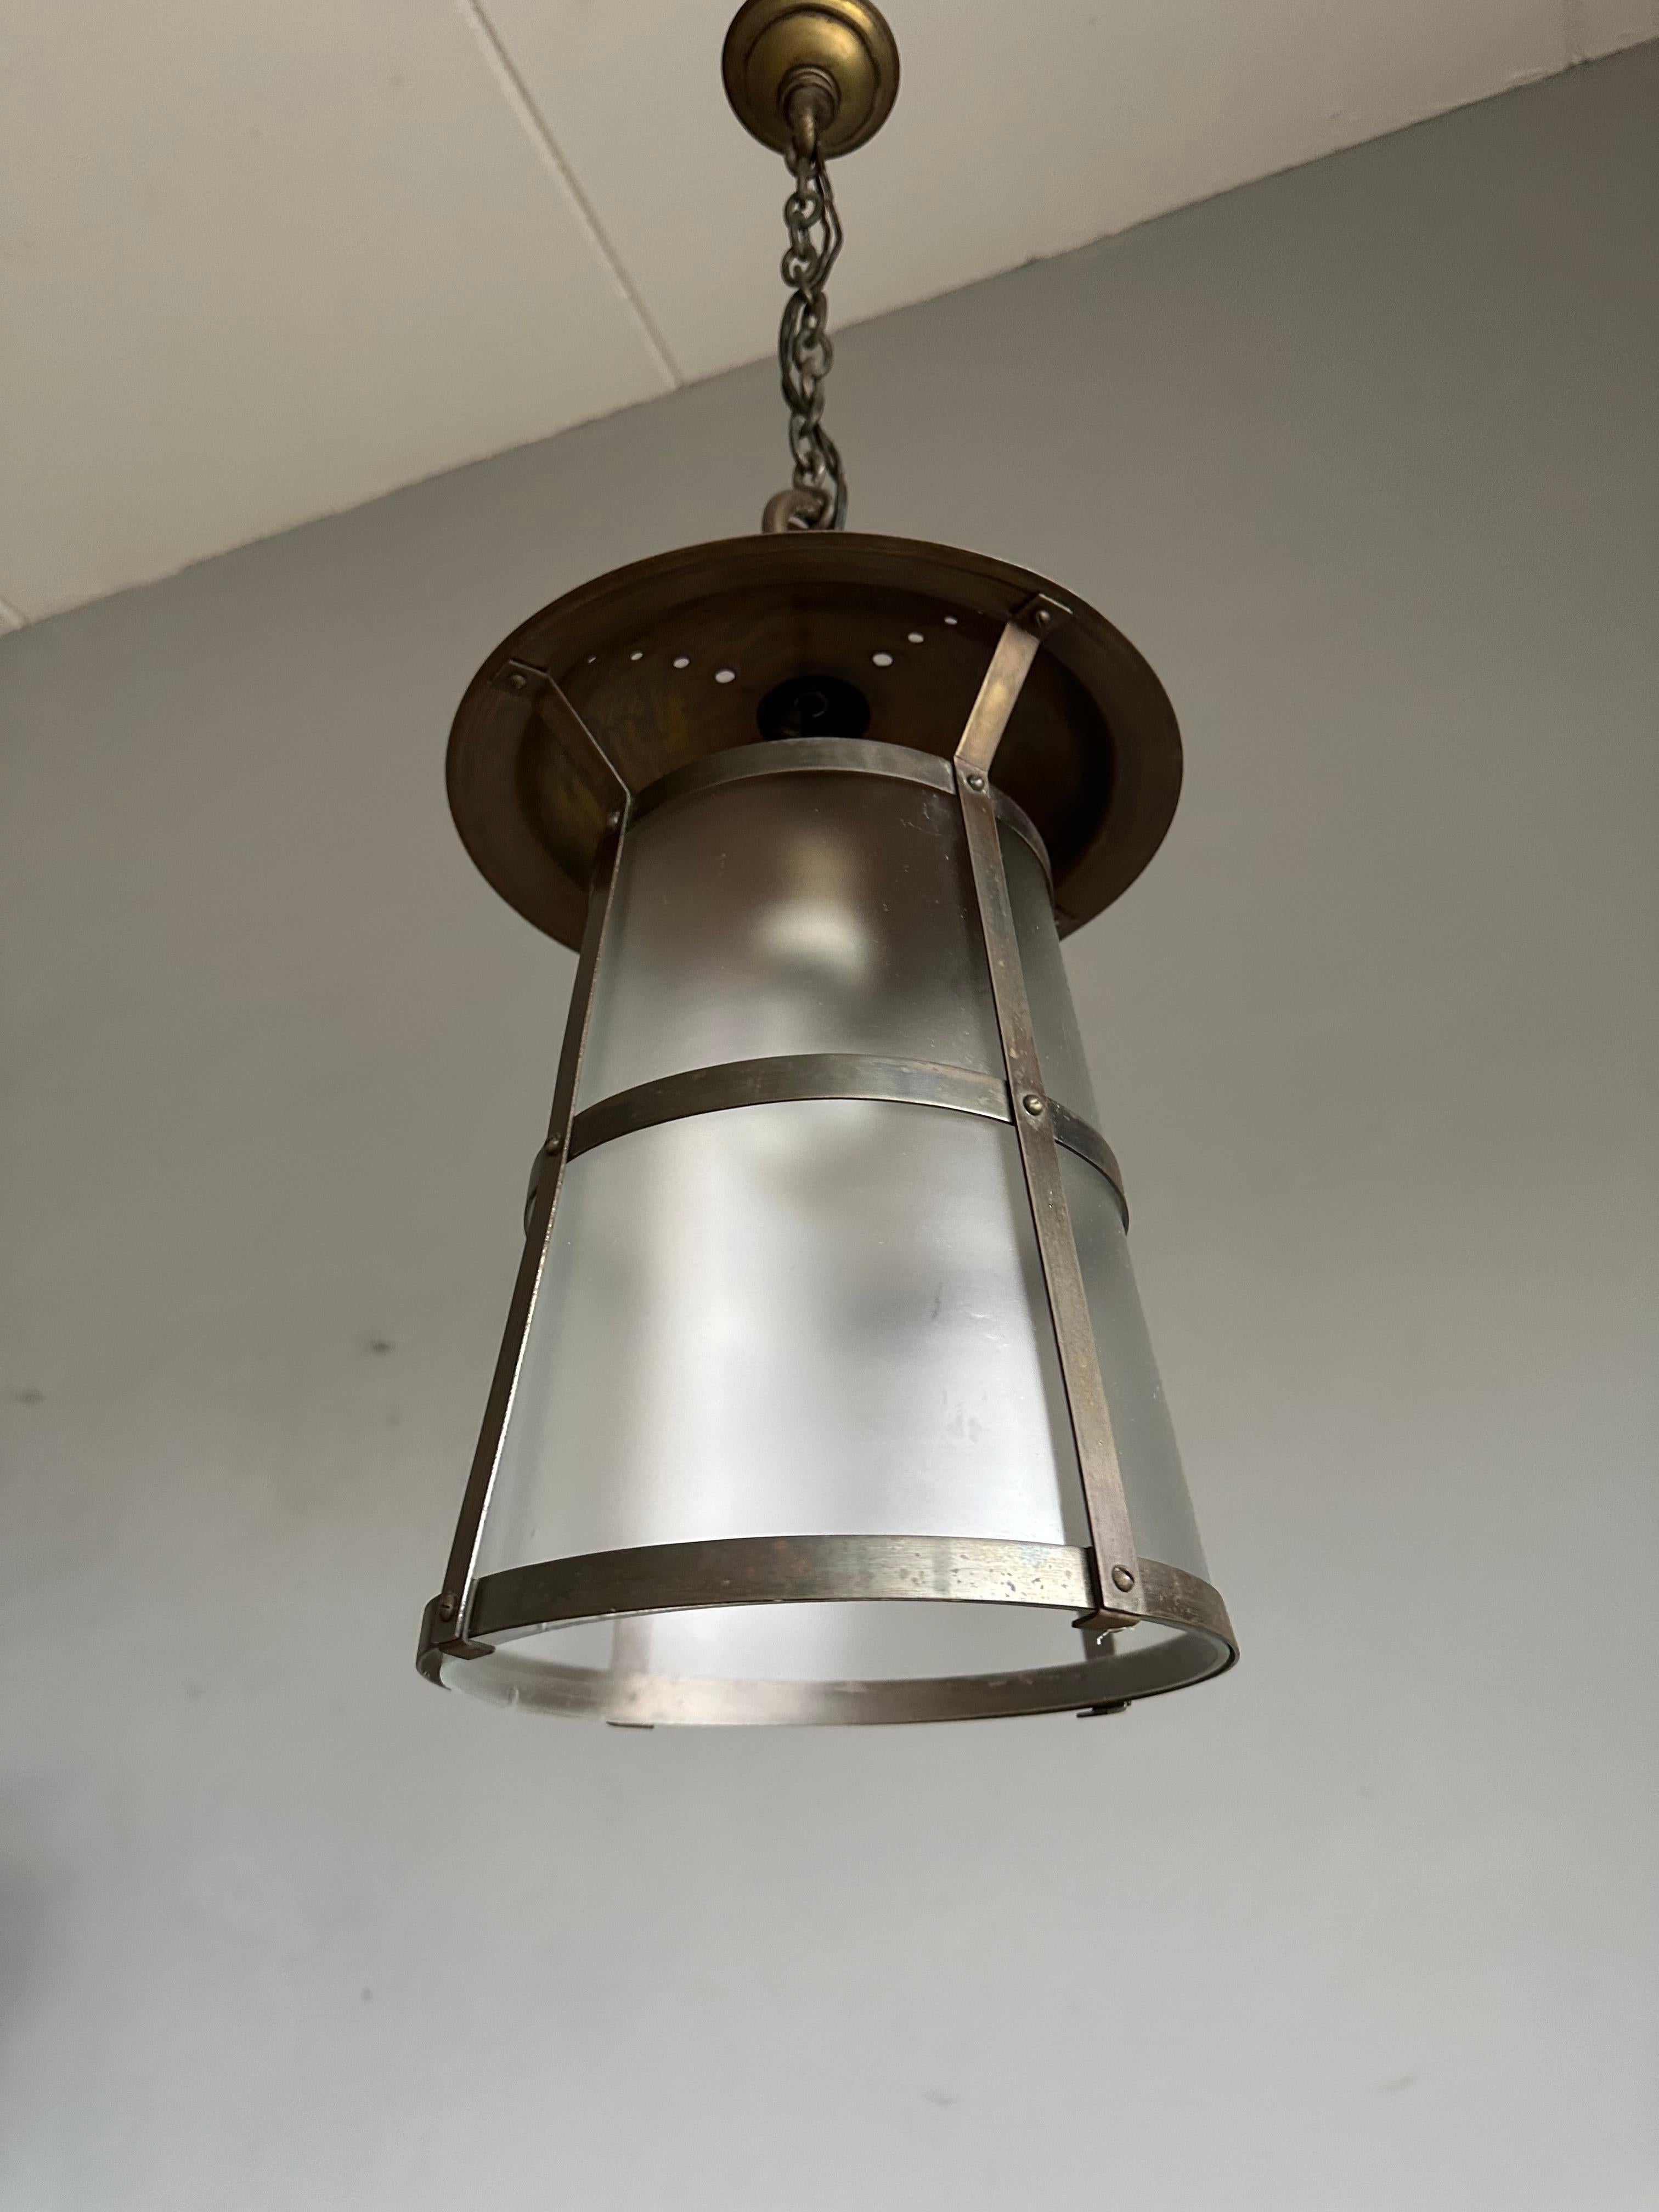 Marvelous design and execution antique pendant light / lantern. In the manner of Hendrik Berlage.

If you are looking for a stylish and quality crafted light to grace your entry hall, landing or bedroom then this Arts & Crafts fixture could be